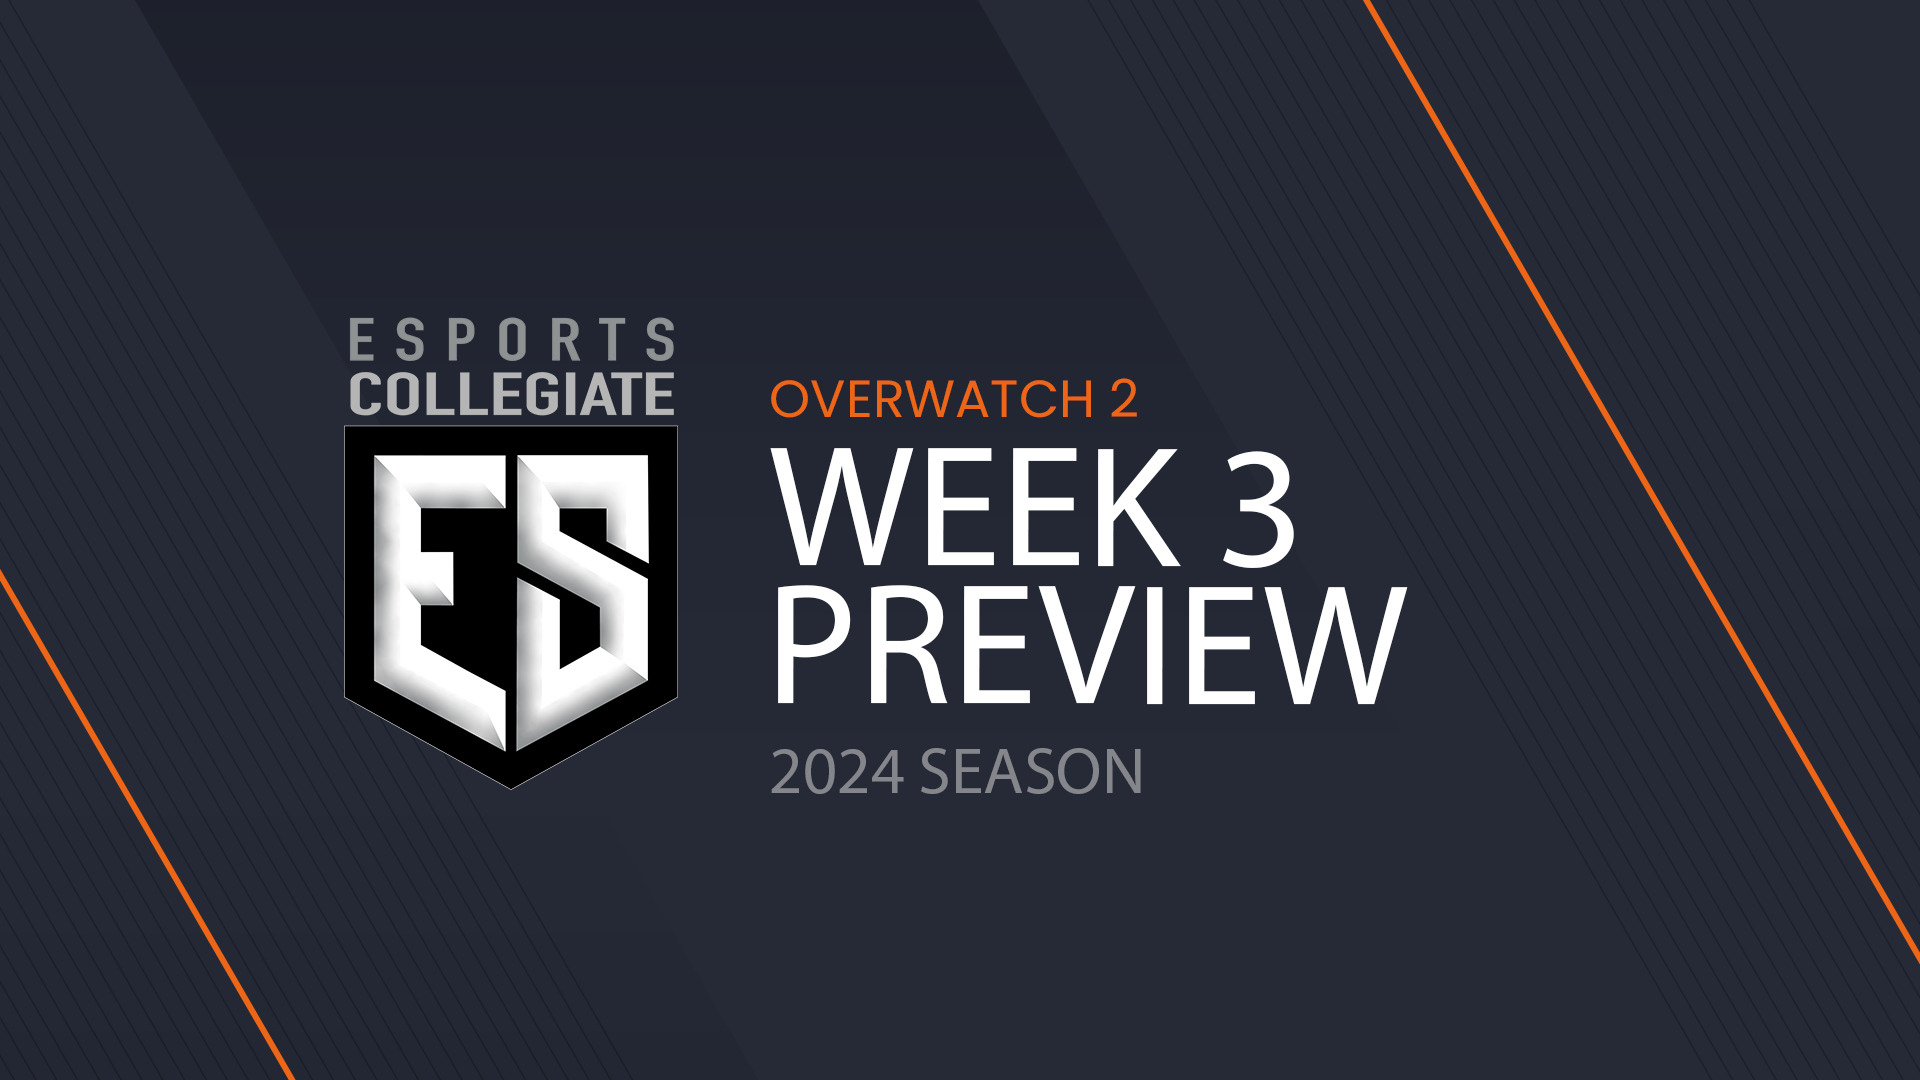 Teams need Samoa wins in ESC Overwatch Week 3 Preview cover image